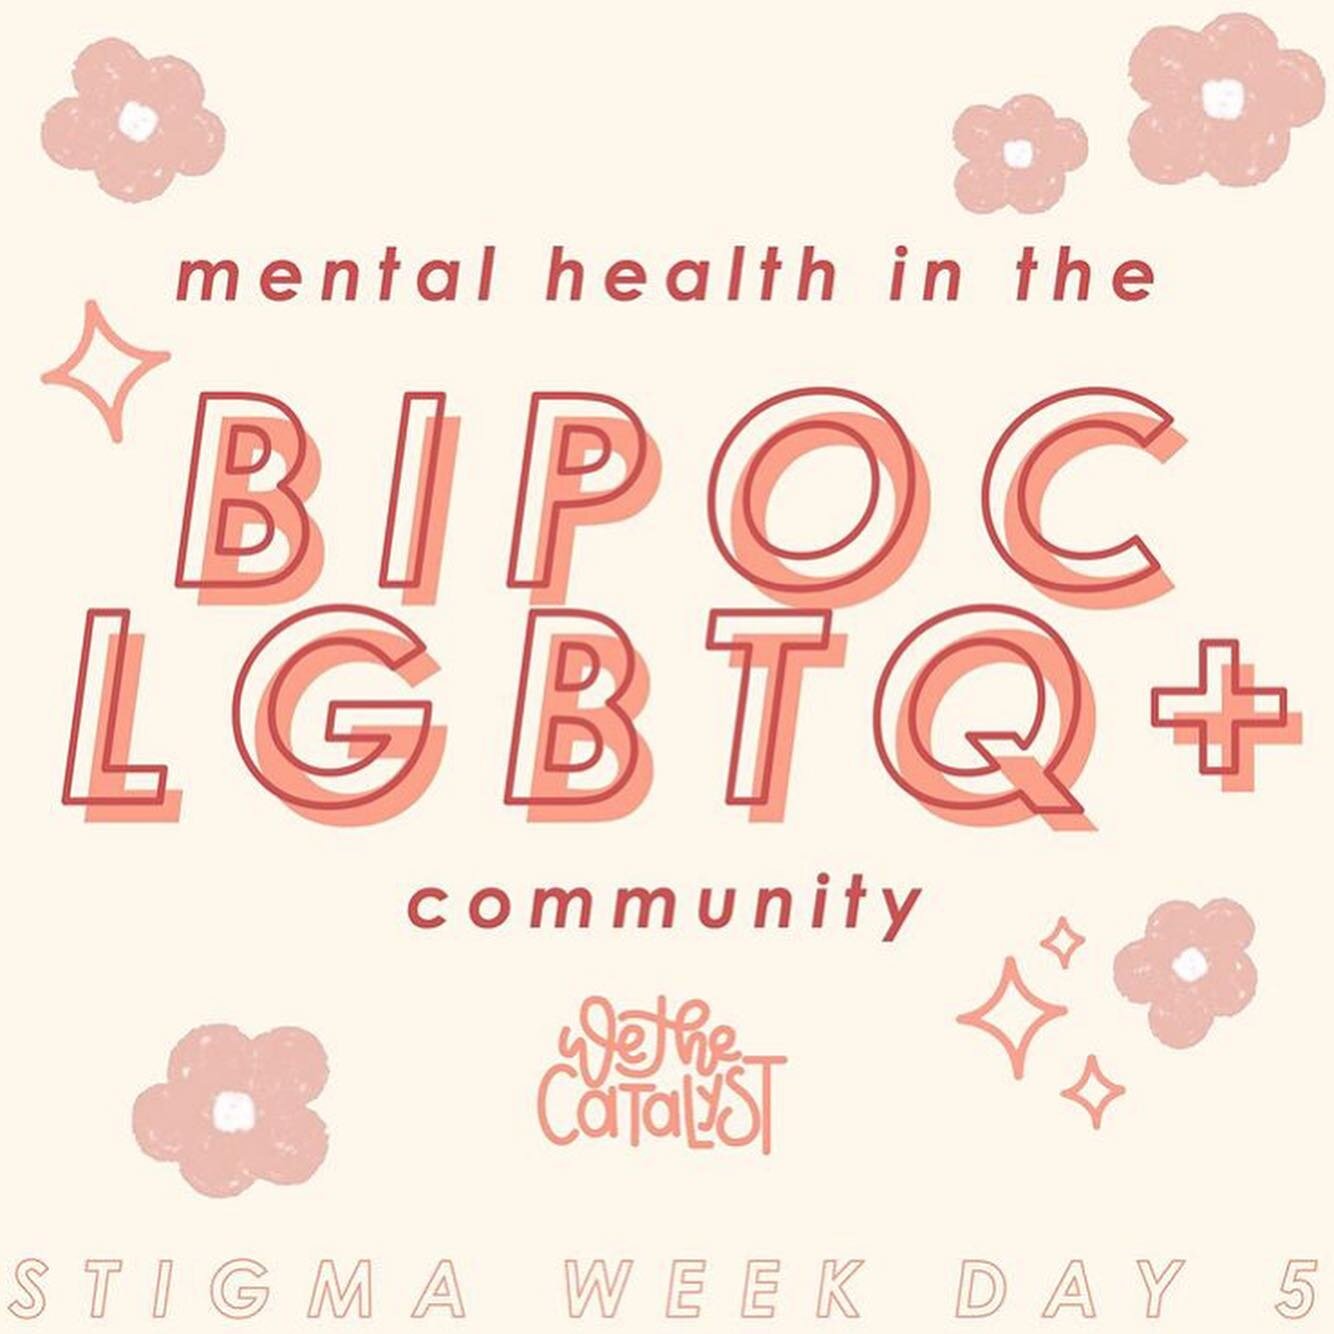 We loved this post from @wethecatalyst&rsquo;s stigma week series 💗 swipe to read some statistics and information you probably didn&rsquo;t know about #MentalHealth in the BIPoC LGBTQ+ community!